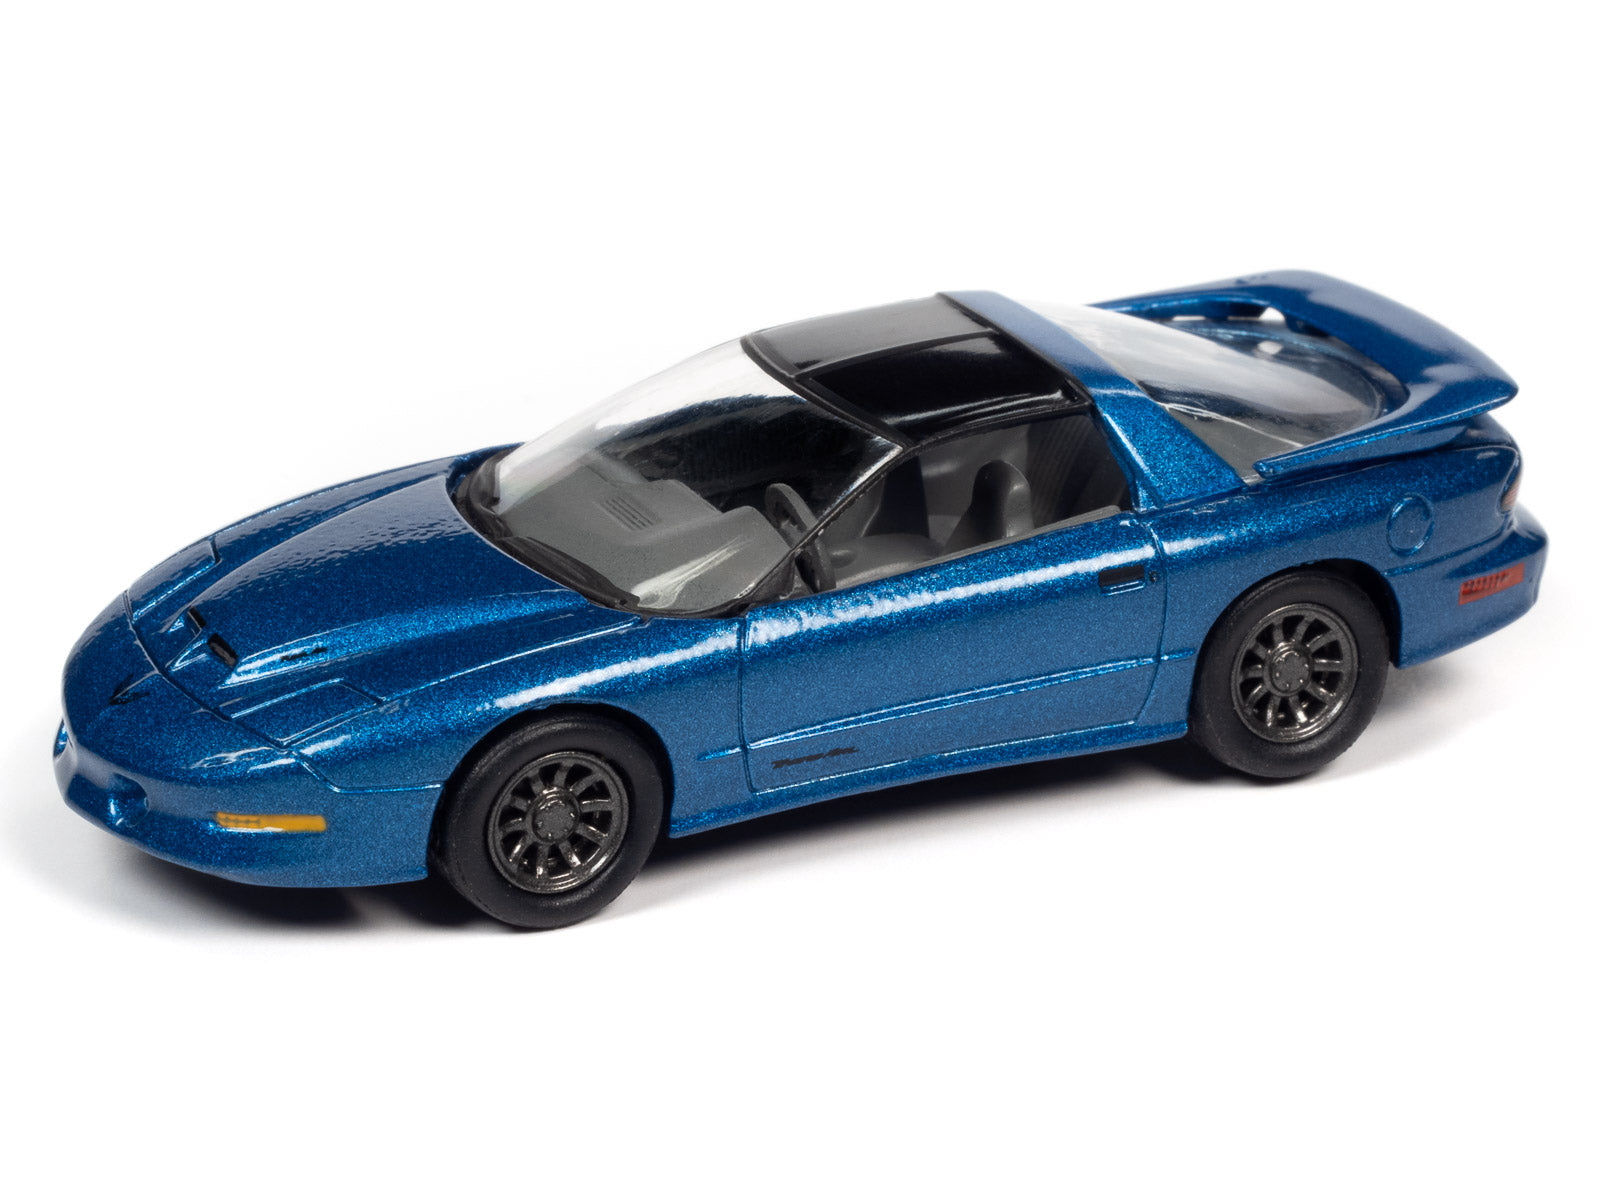 Johnny Lightning 1/64 Scale Diecast Cars | Auto World Store – Page 6